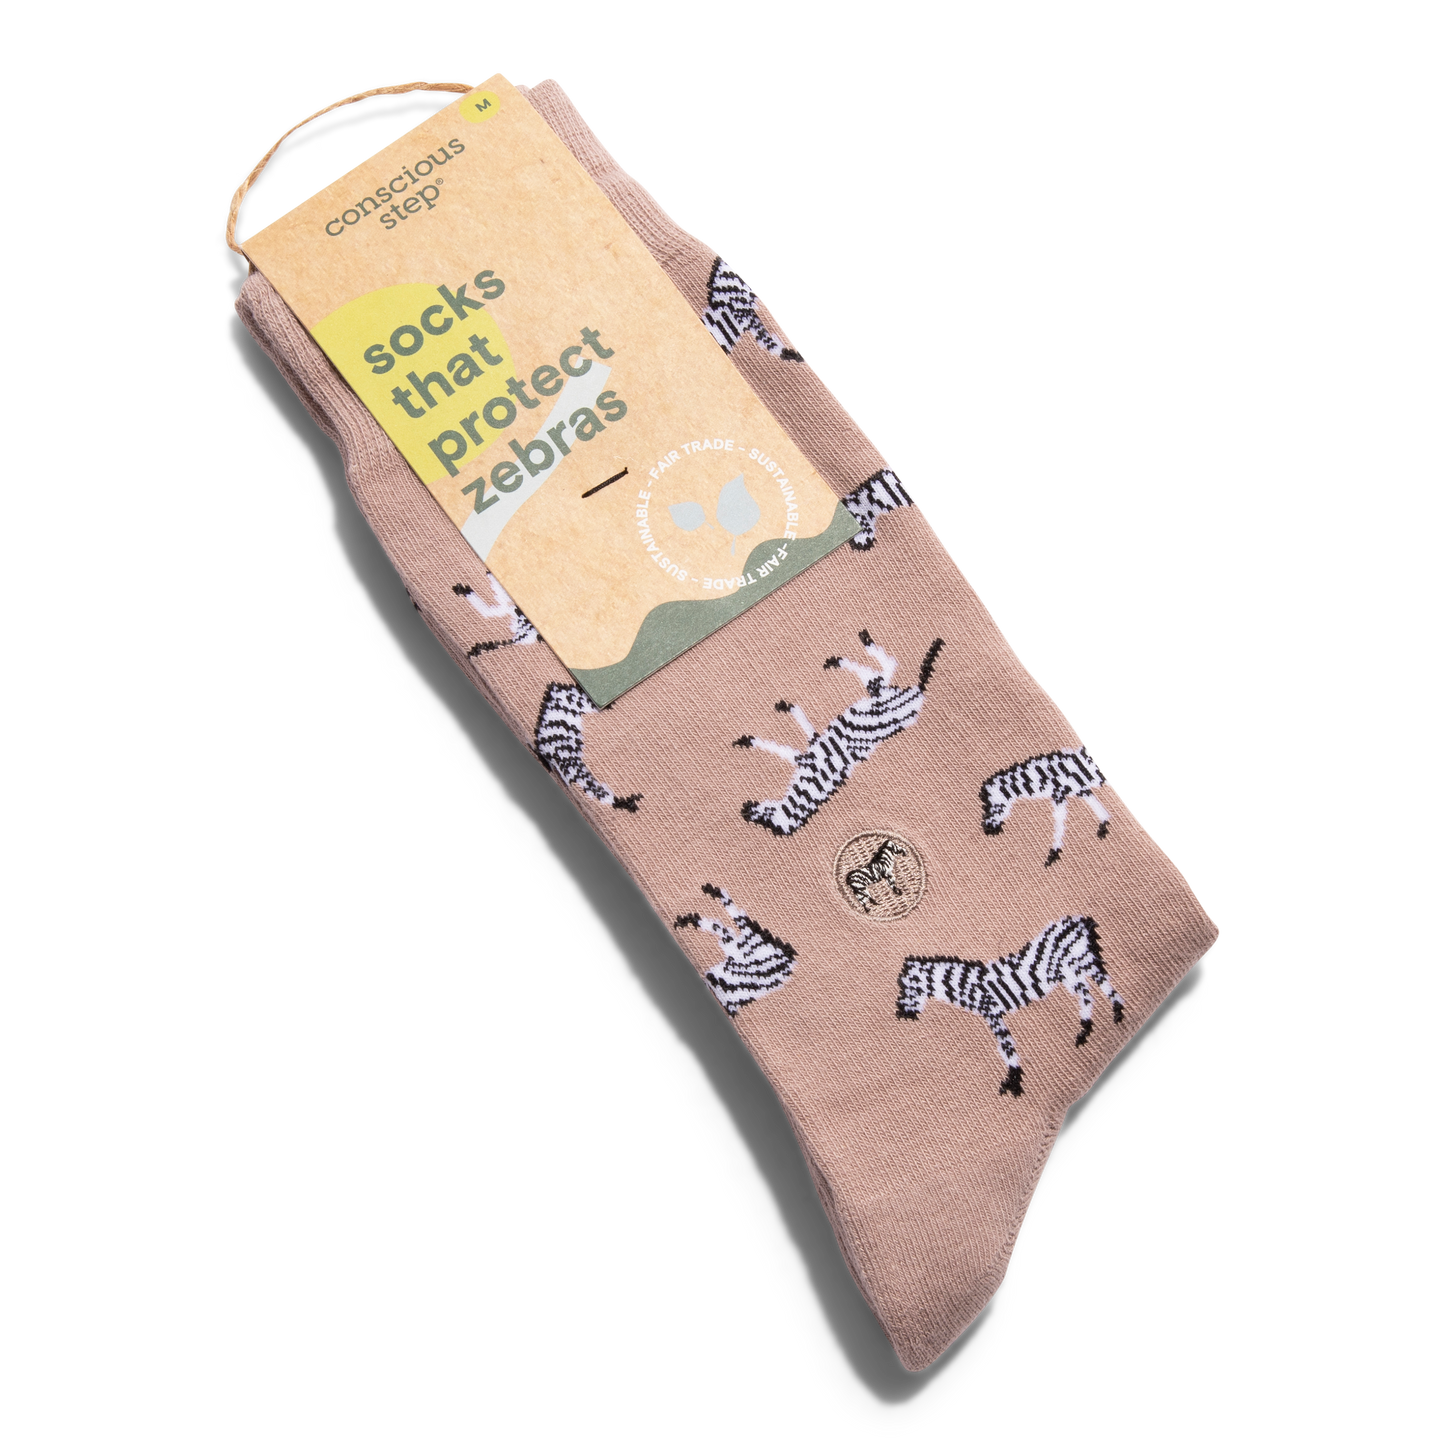 Socks that Protect Zebras: Small